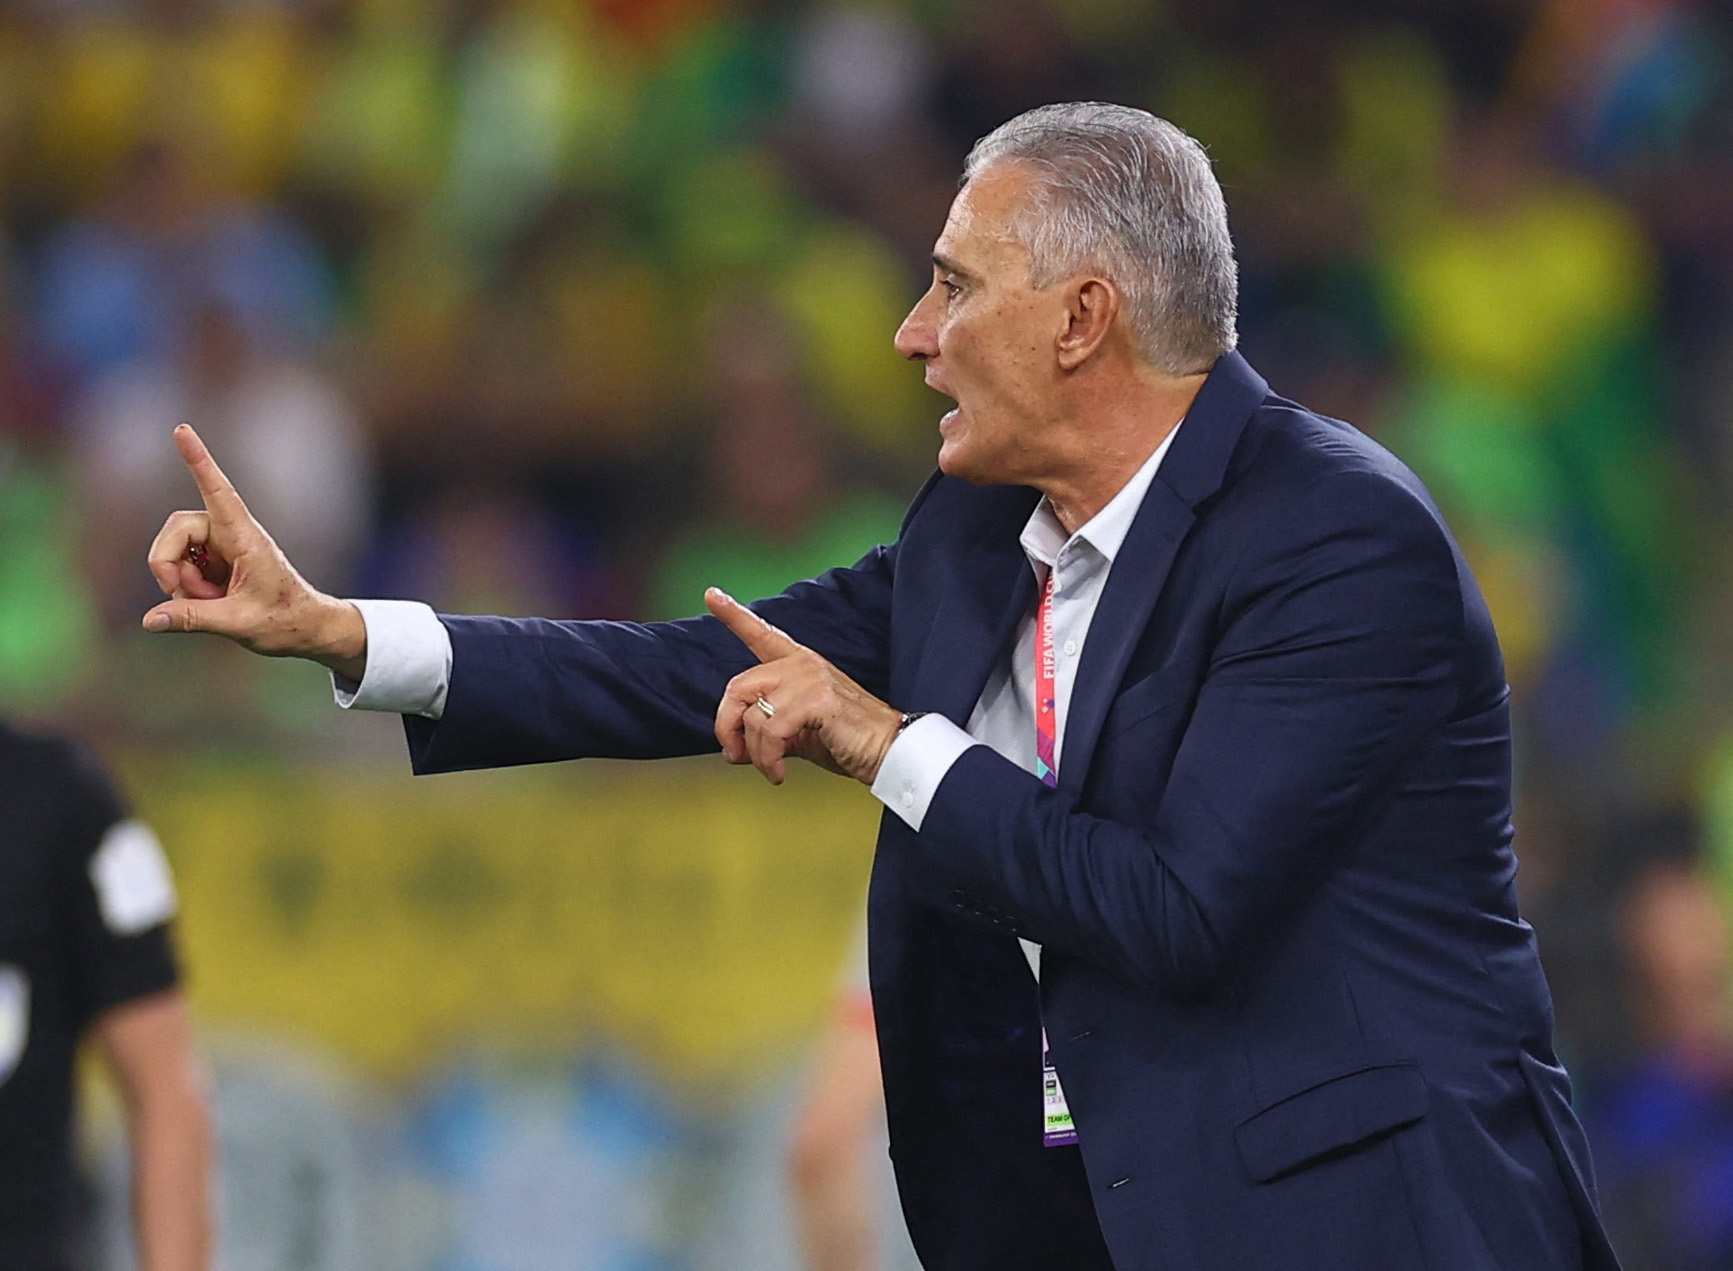 Brazil's coach says he couldn't resist a dance after goal | Reuters